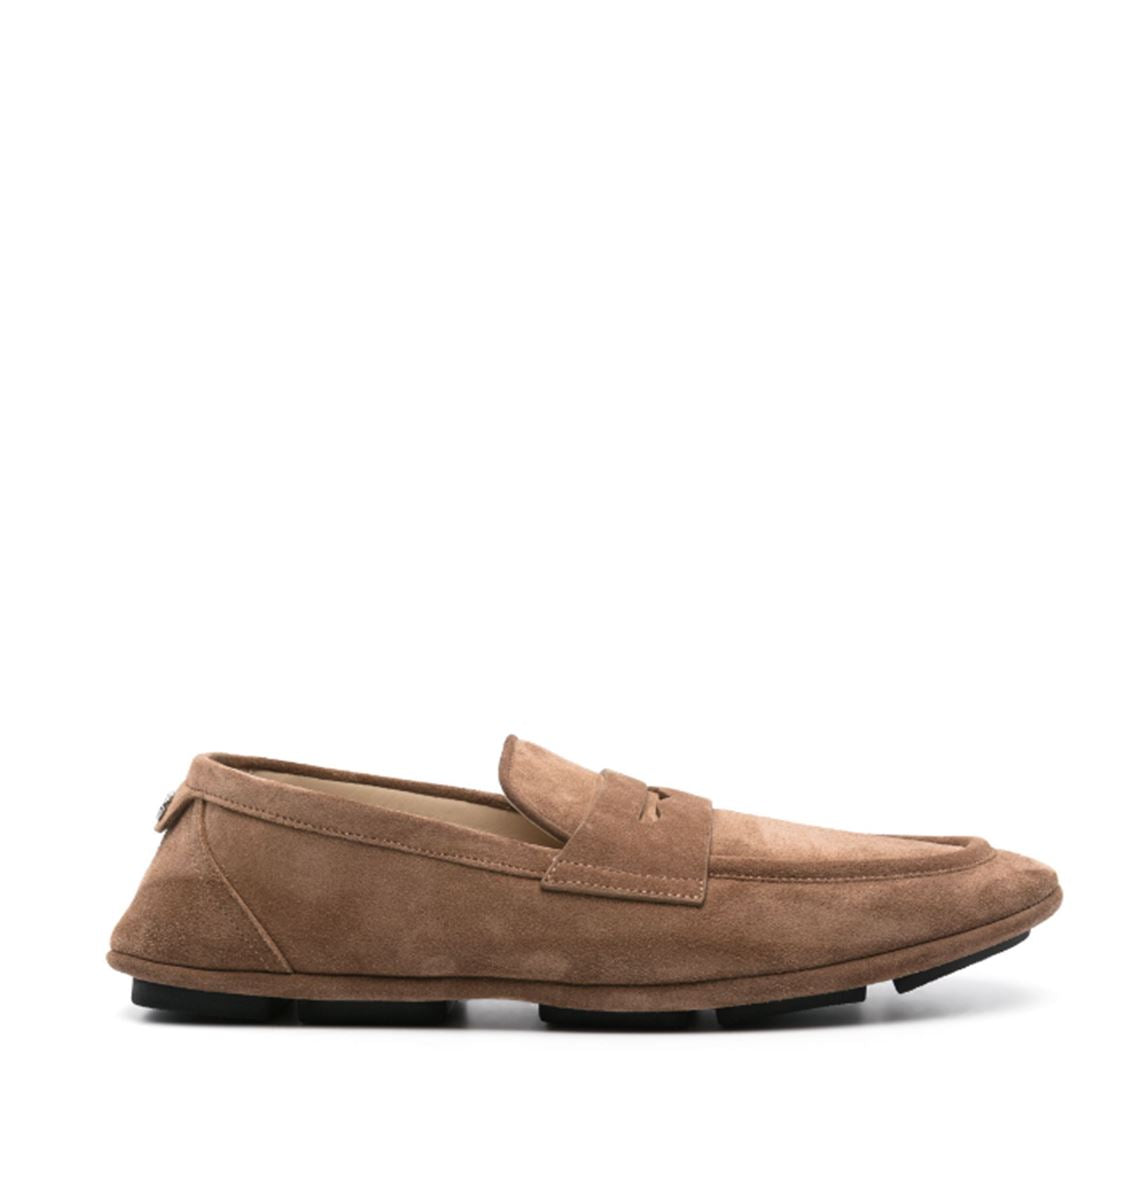 LOGO-PLAQUE SUEDE LOAFERS